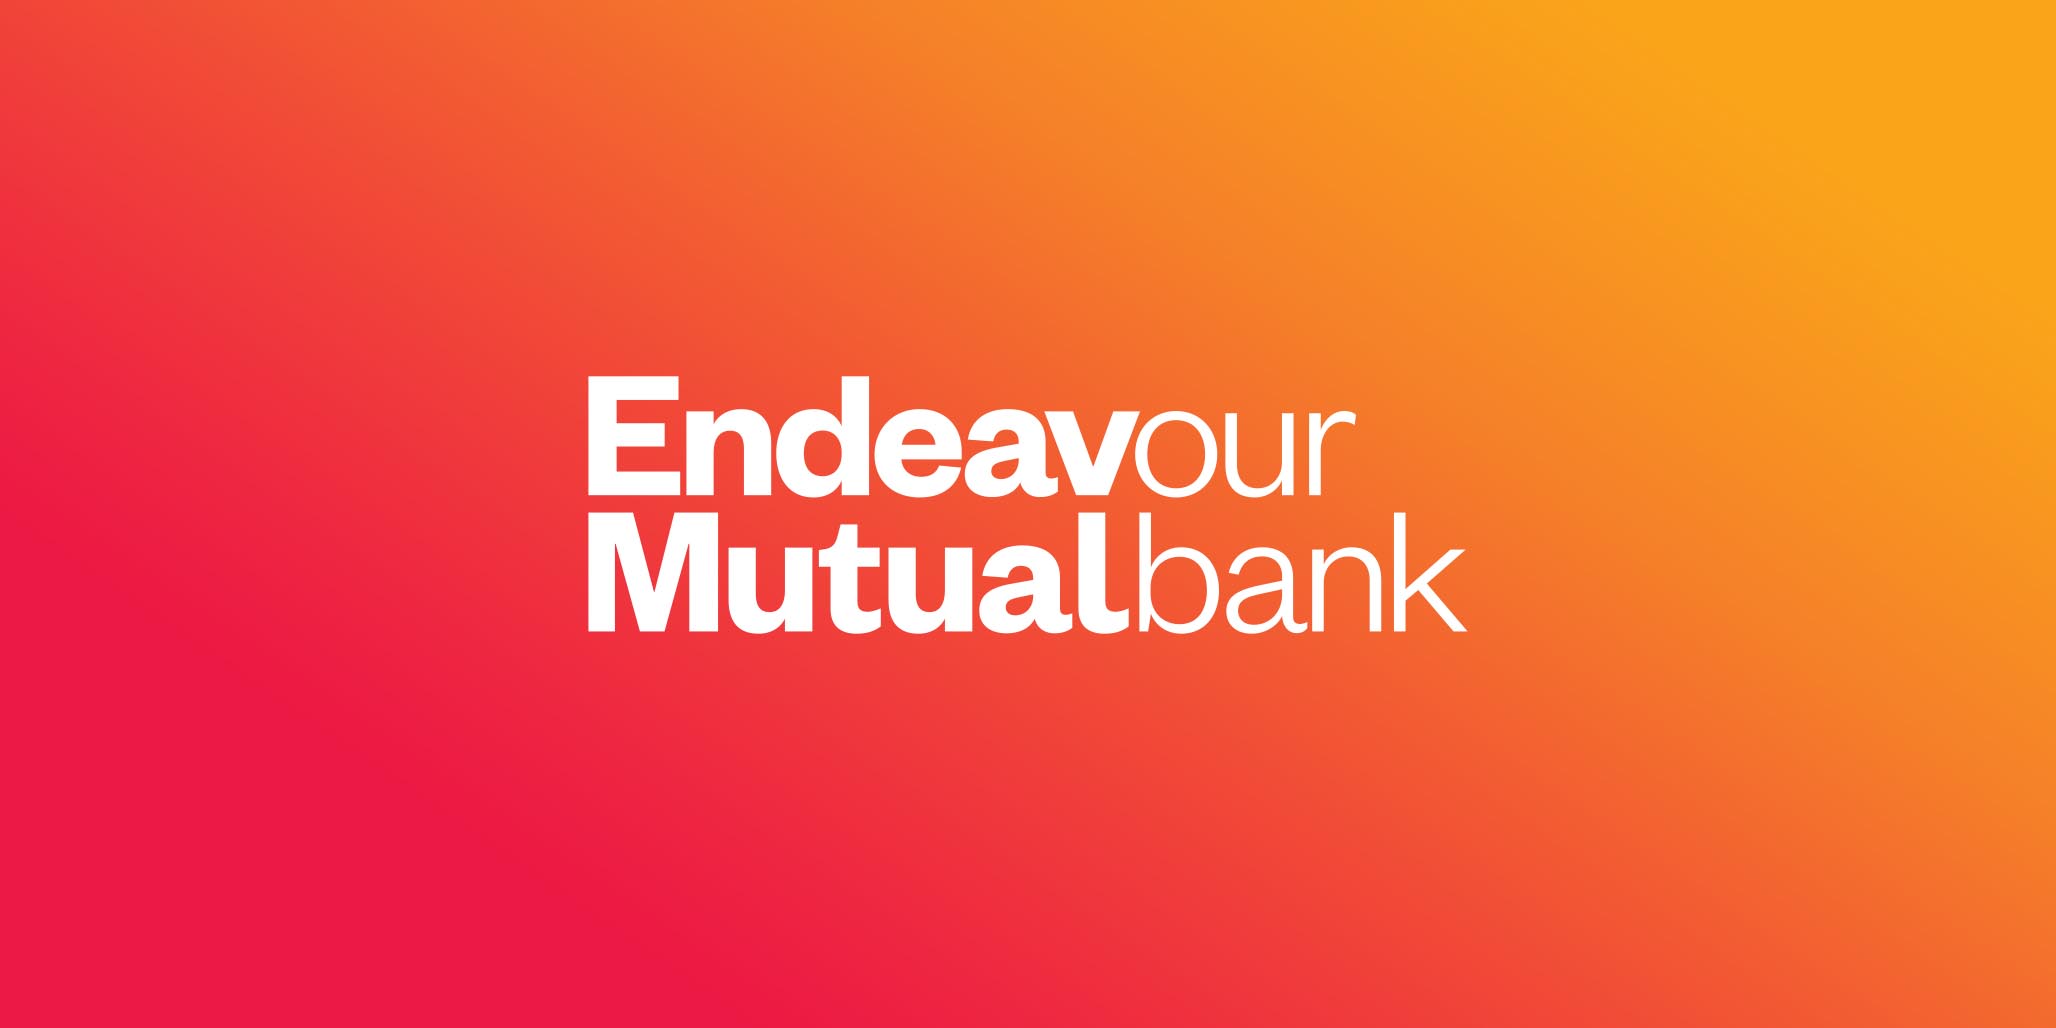 Rebranding, Brand Identity Design & Roll-out project for financial services company, Endeavour Mutual Bank, Sydney, Australia, image Q